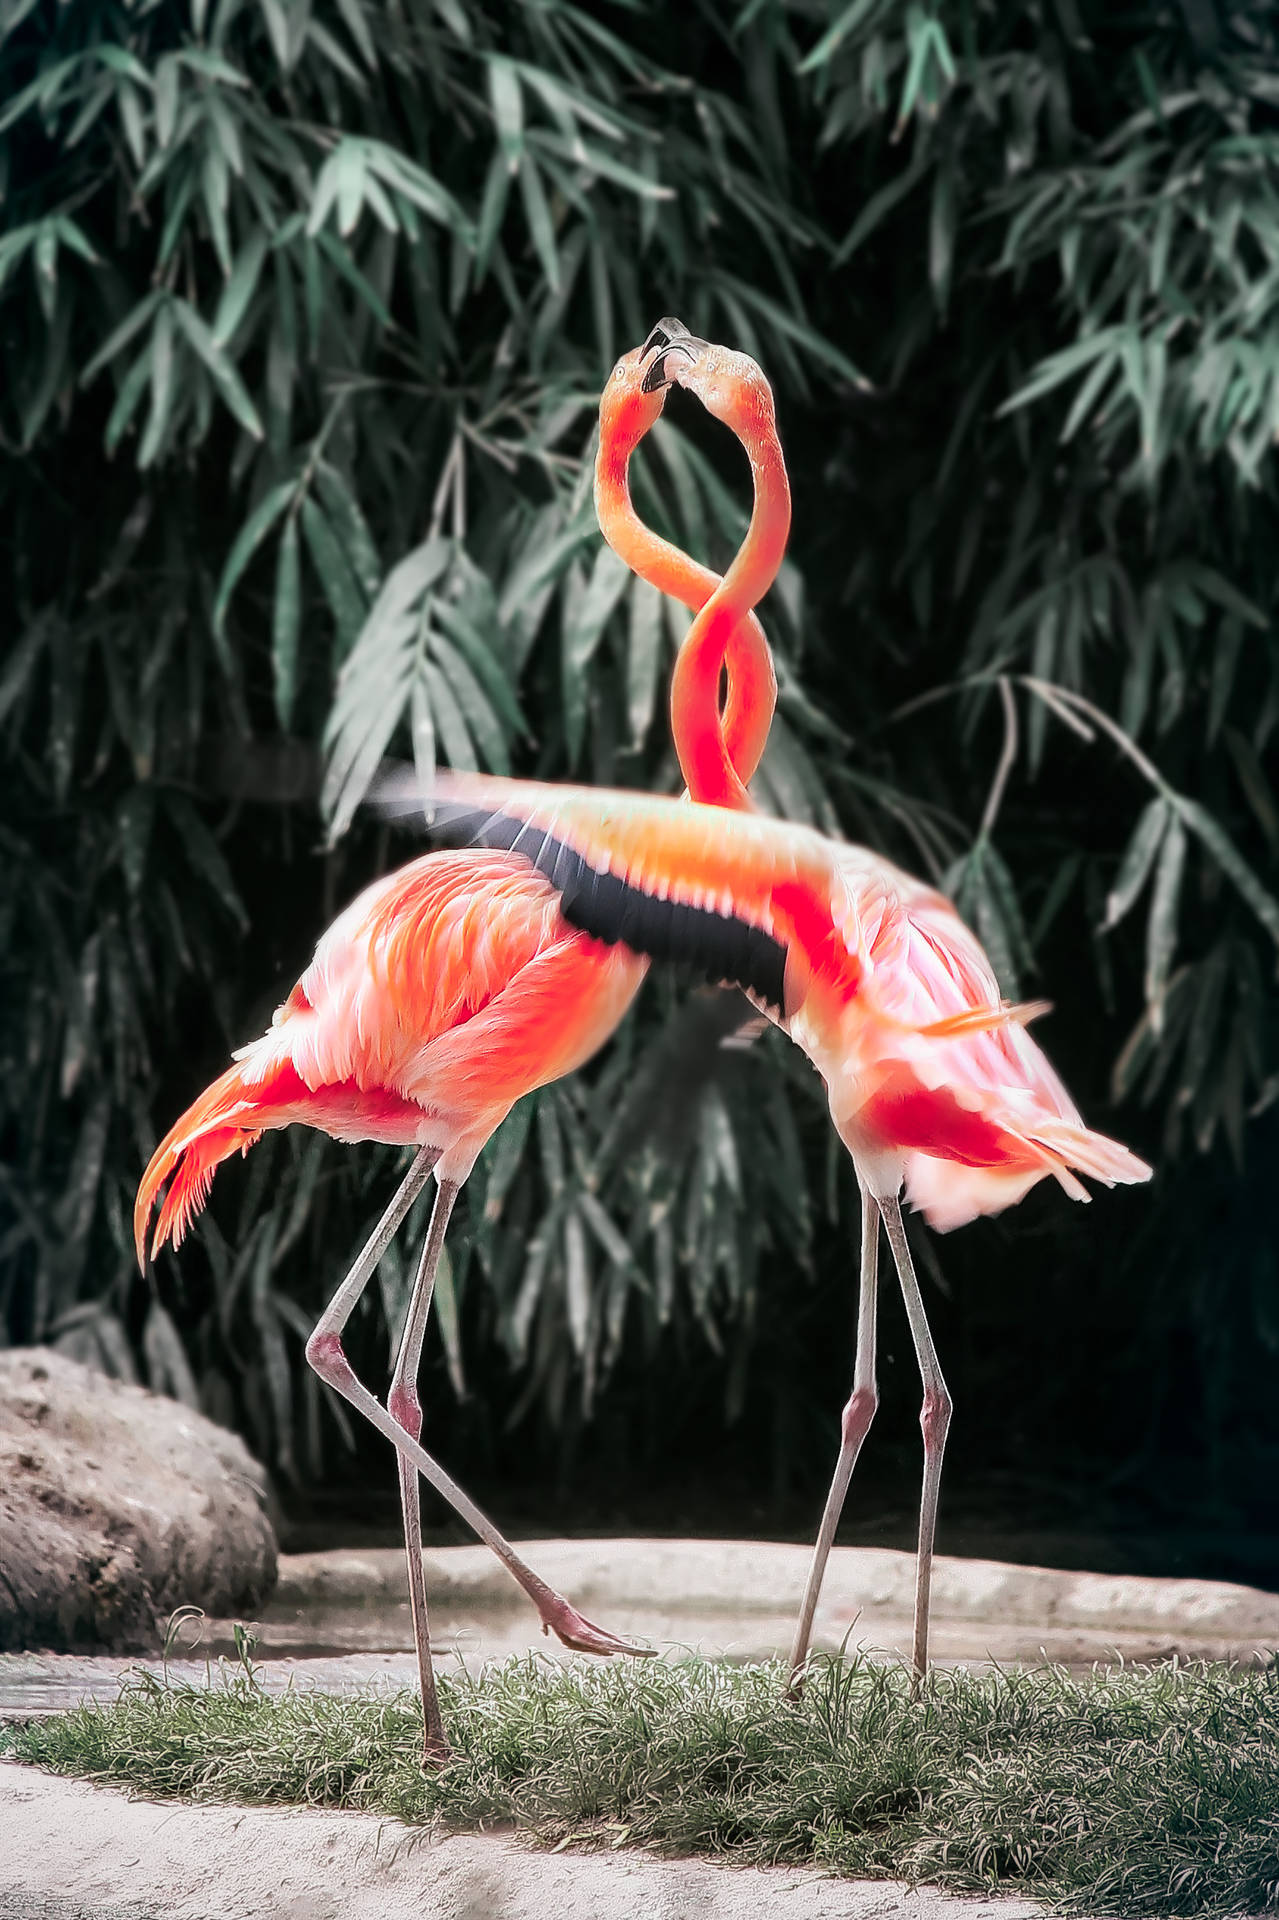 Flamingo 2199X3300 Wallpaper and Background Image